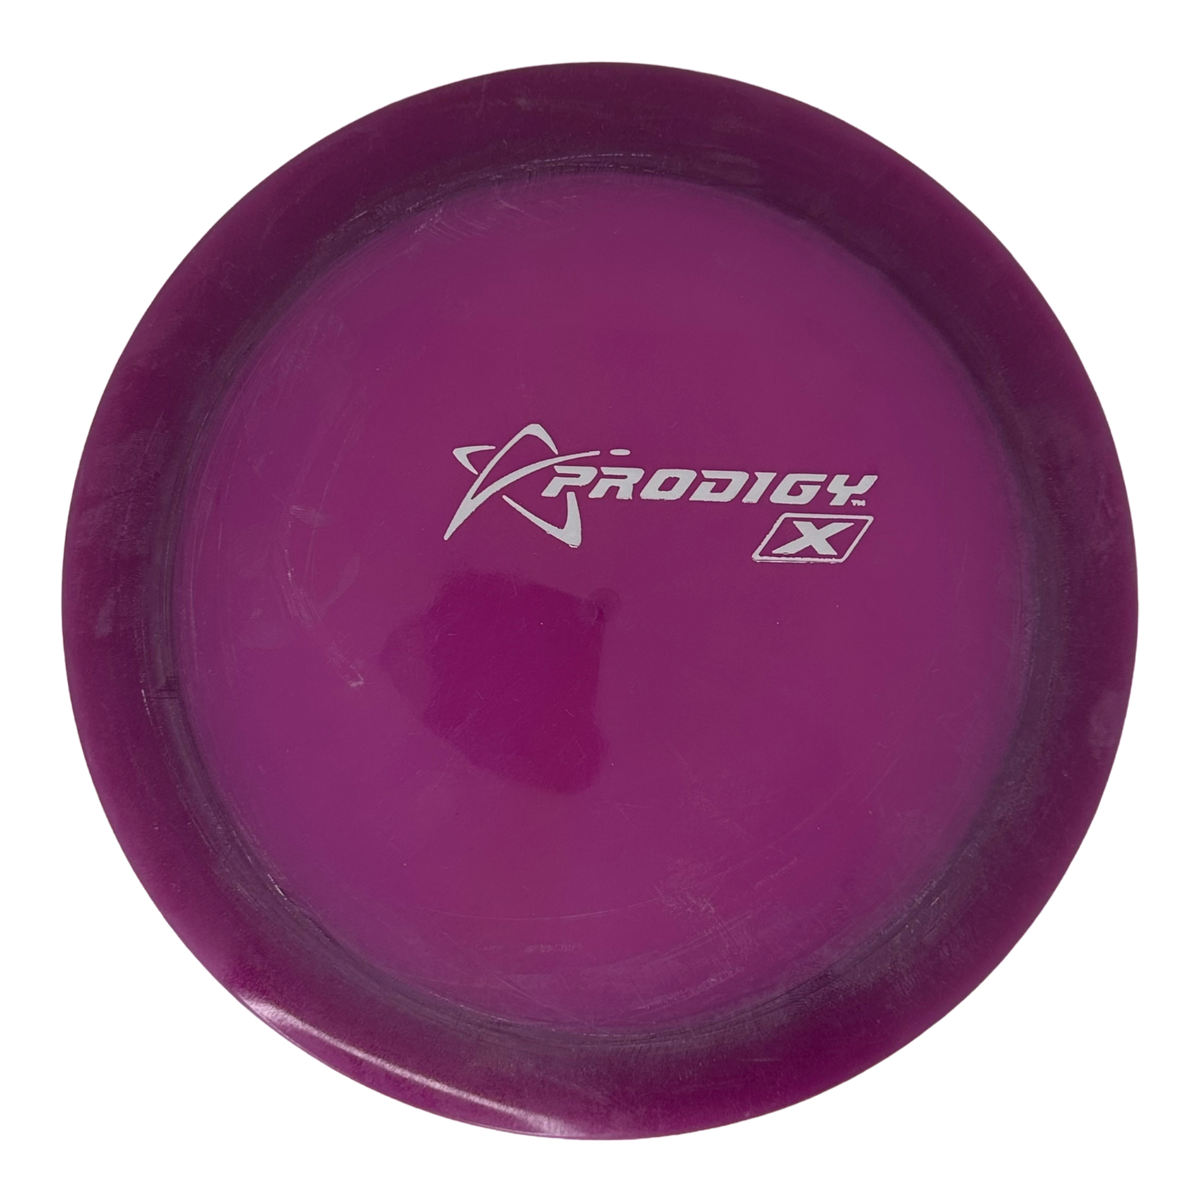 Prodigy Air X2 - X-Outs